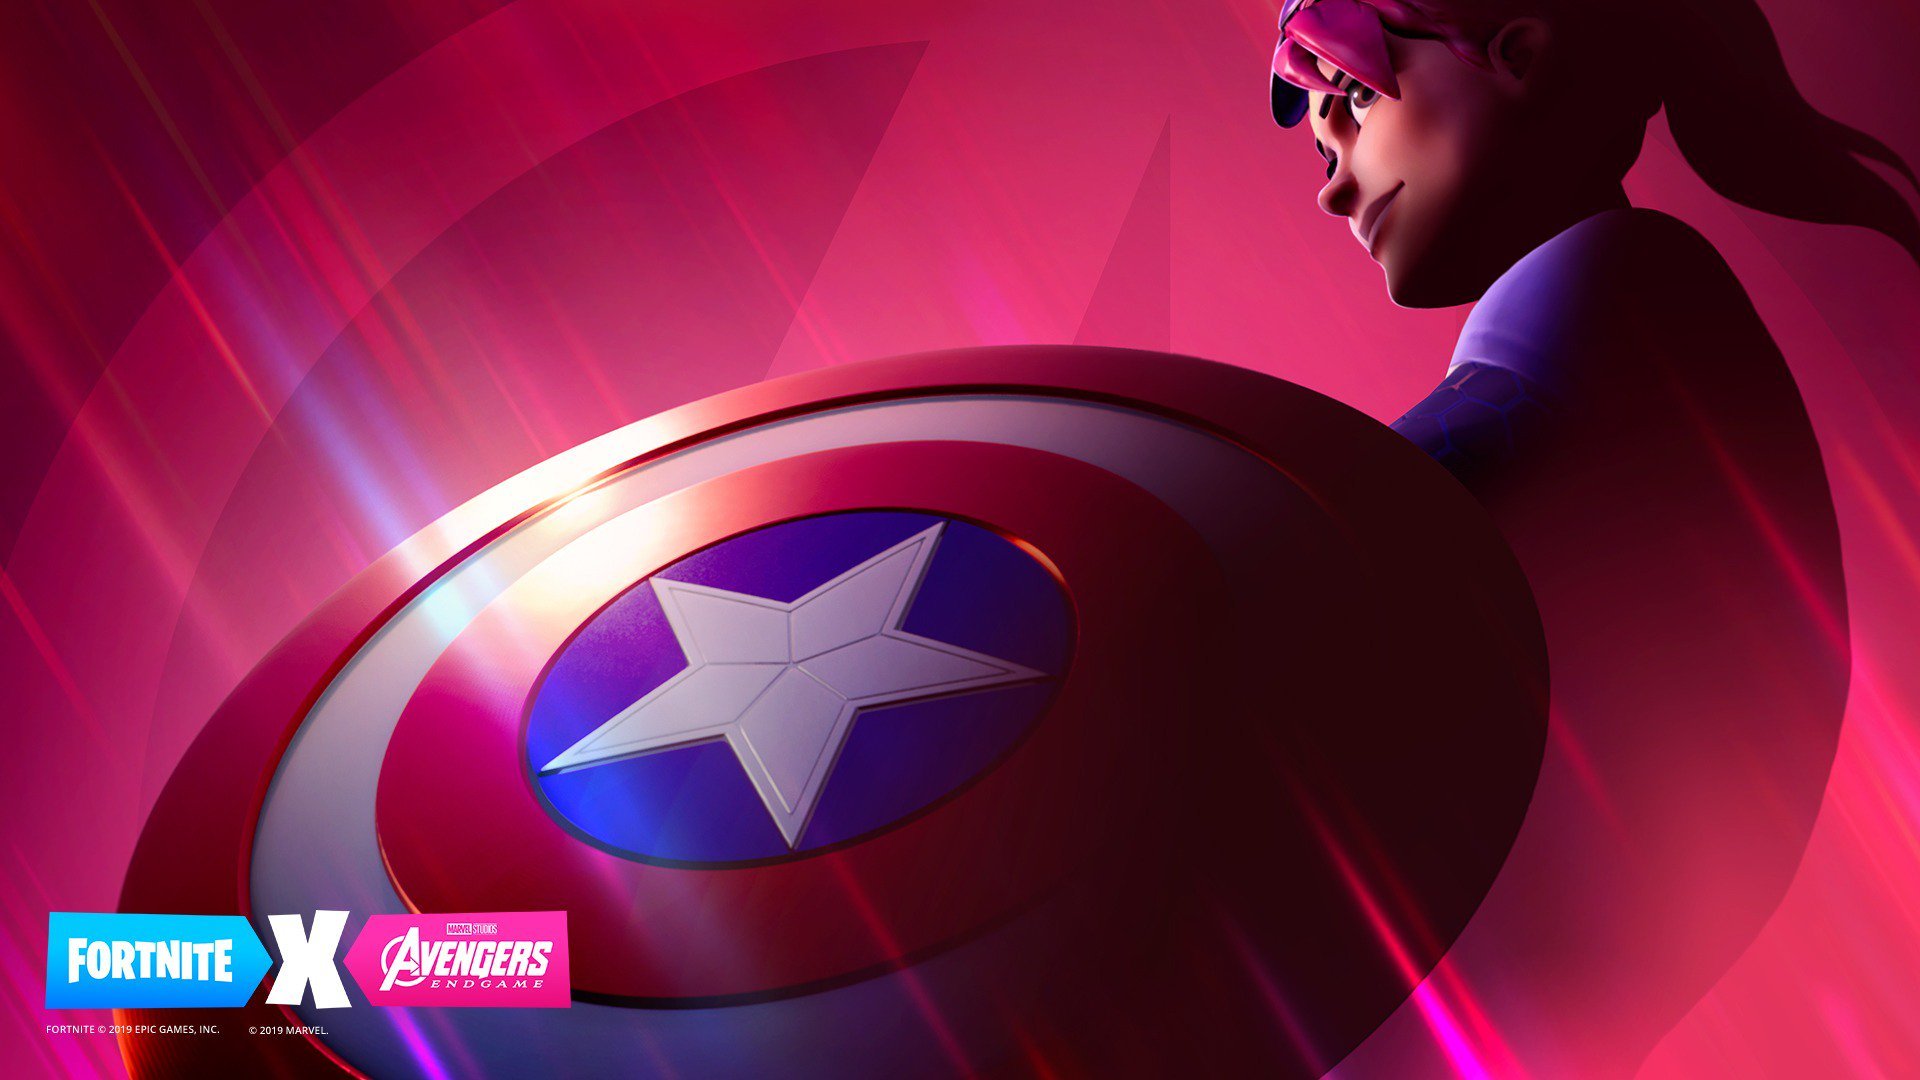 The Avengers Are Returning To Fortnite In New Crossover Event